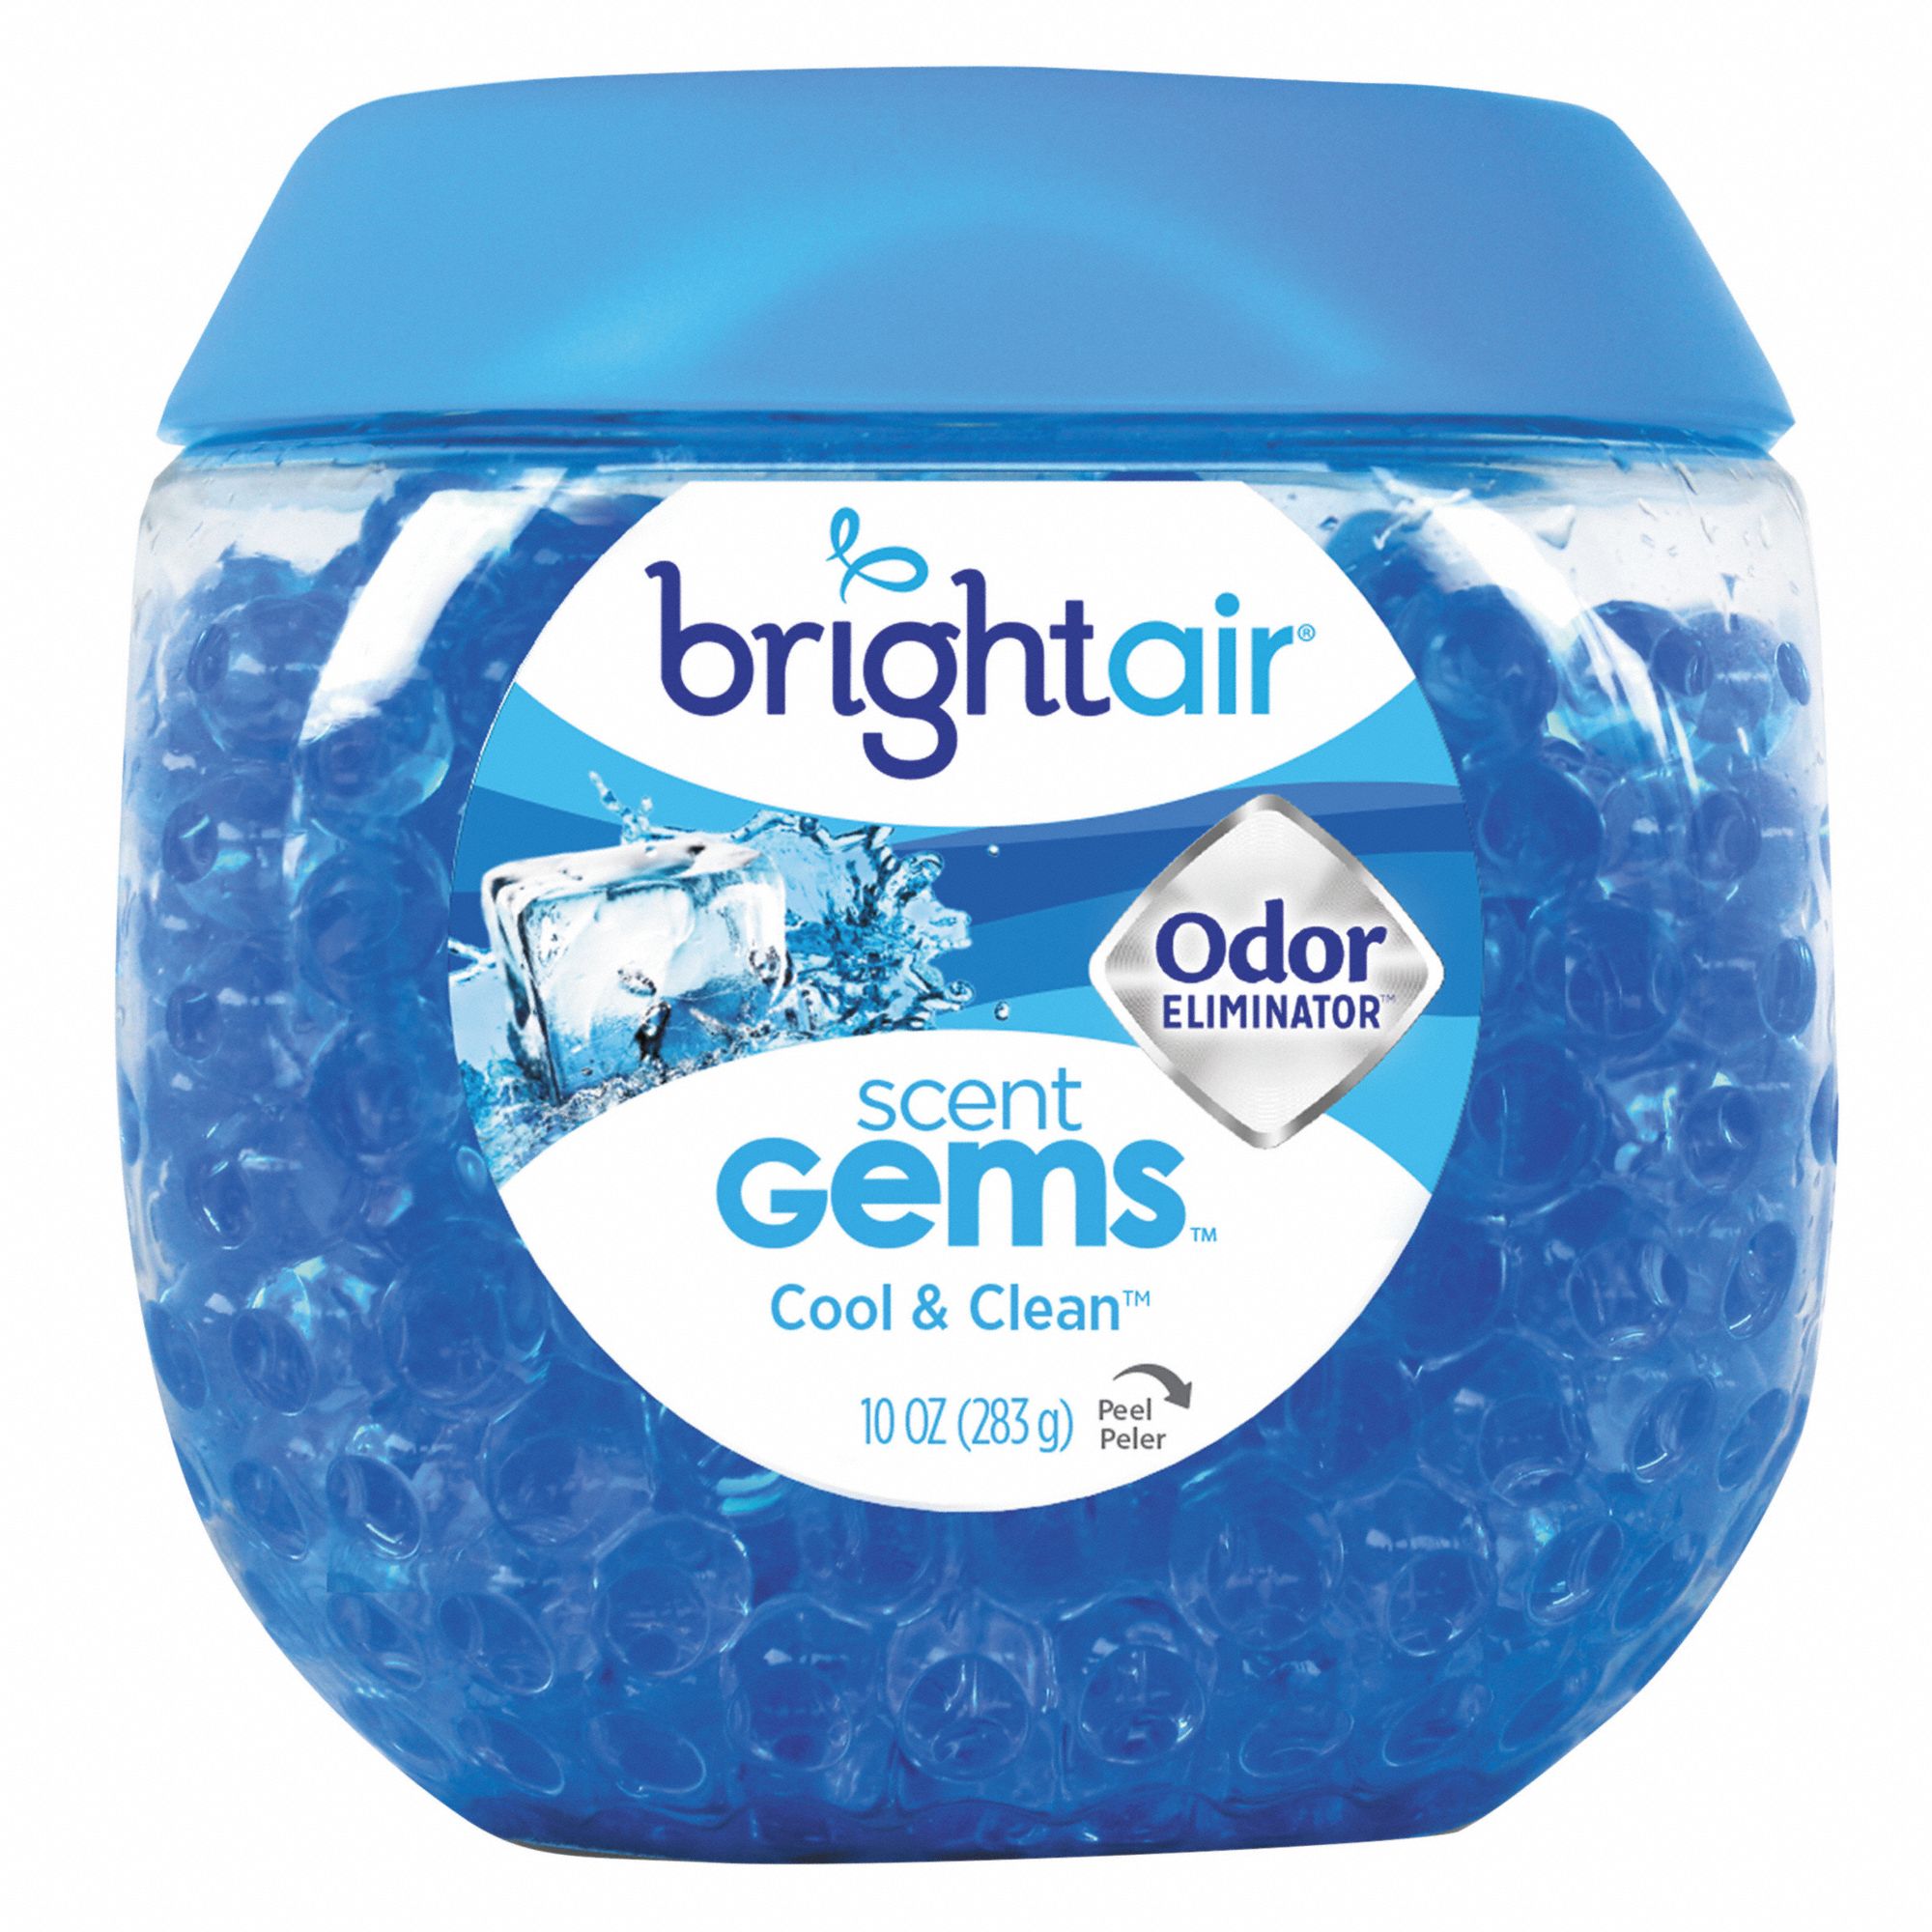 Deodorizer: Odor Eliminators, Jar, 10 oz Container Size, Beads, Ready to Use, Blue